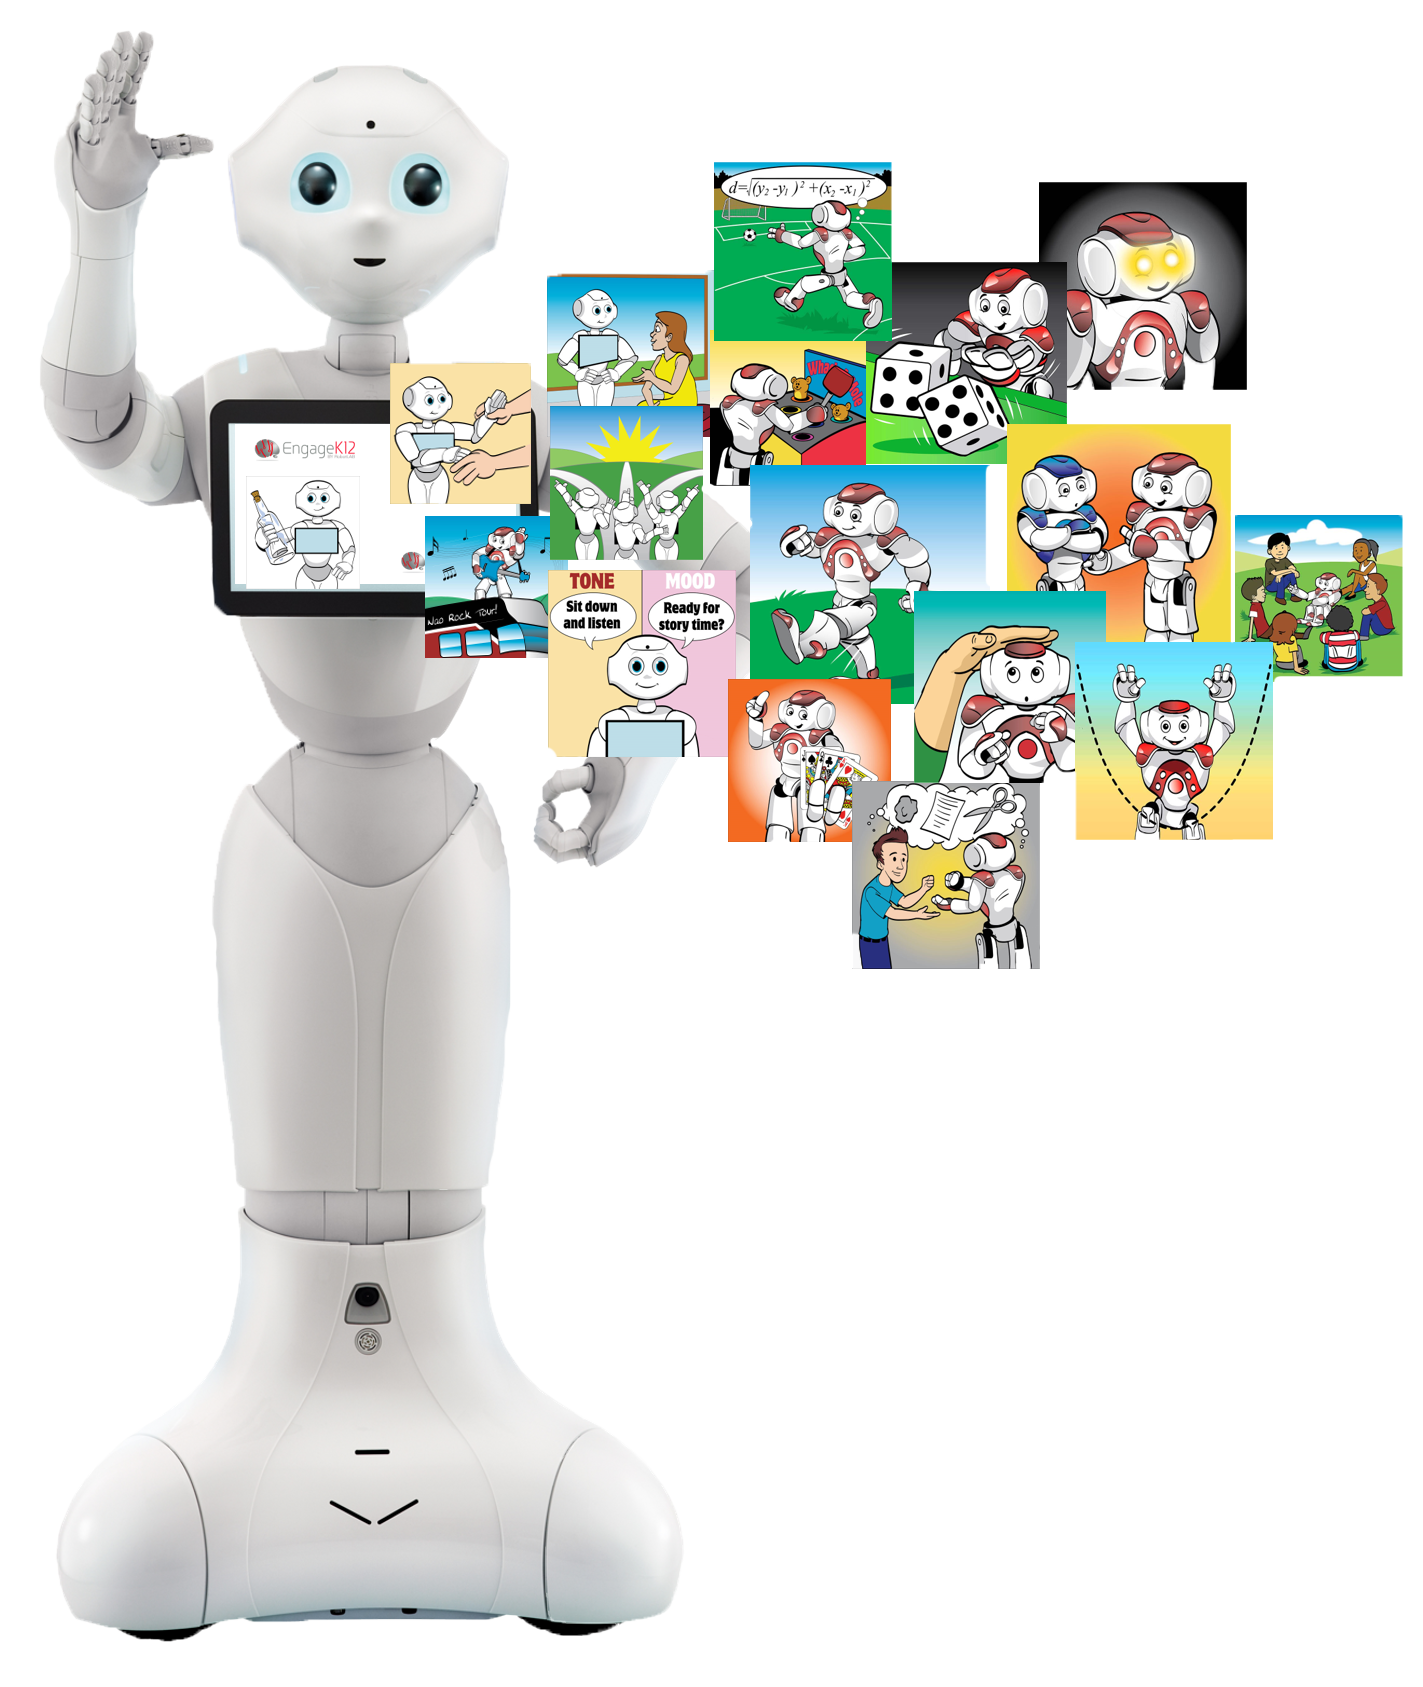 Napier linse lindring Pepper Robot Academic Edition for Schools